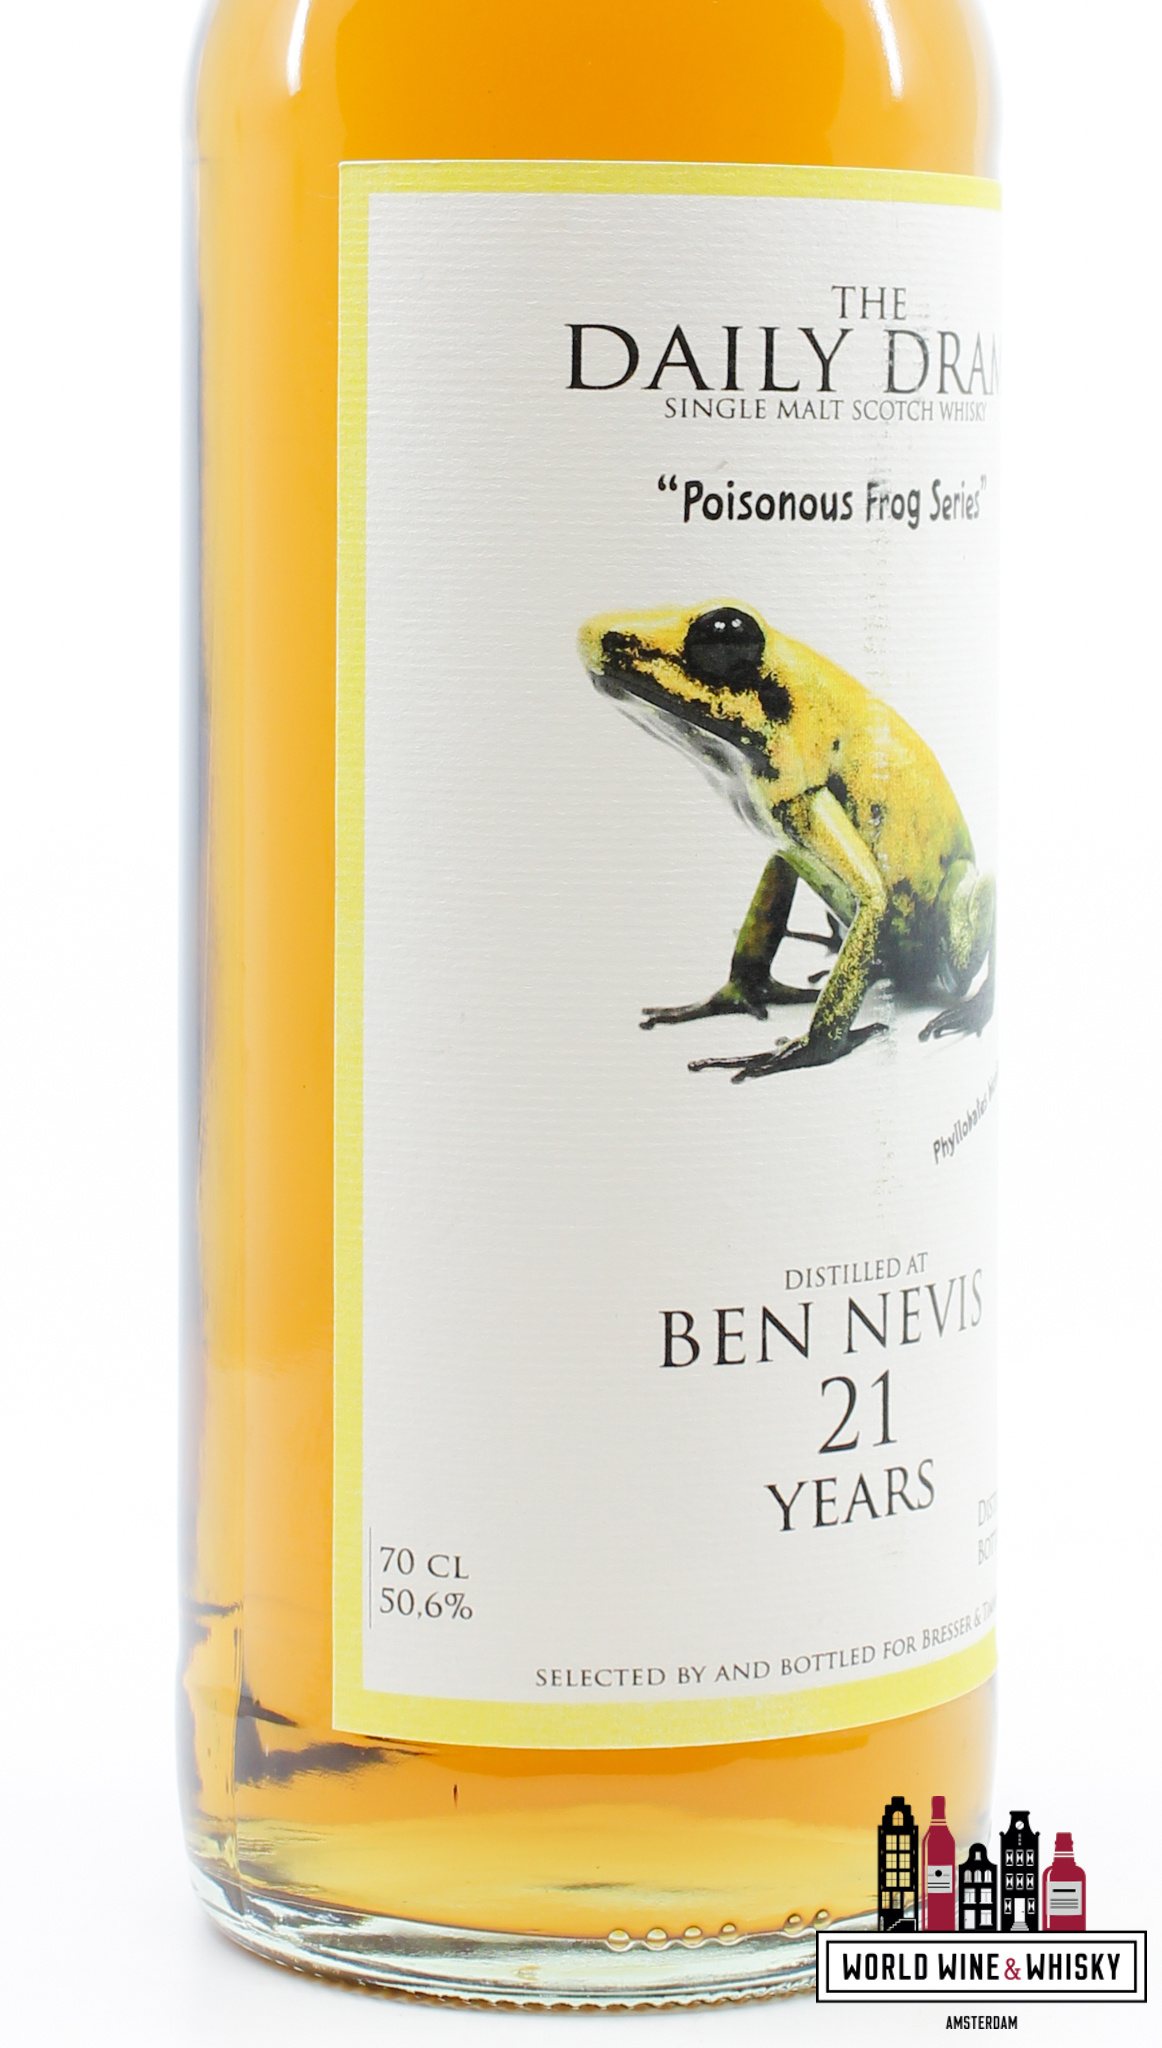 Ben Nevis Ben Nevis 21 Years Old 1996 2018 - Poisonous Frog Series - The Daily Dram 50.6%